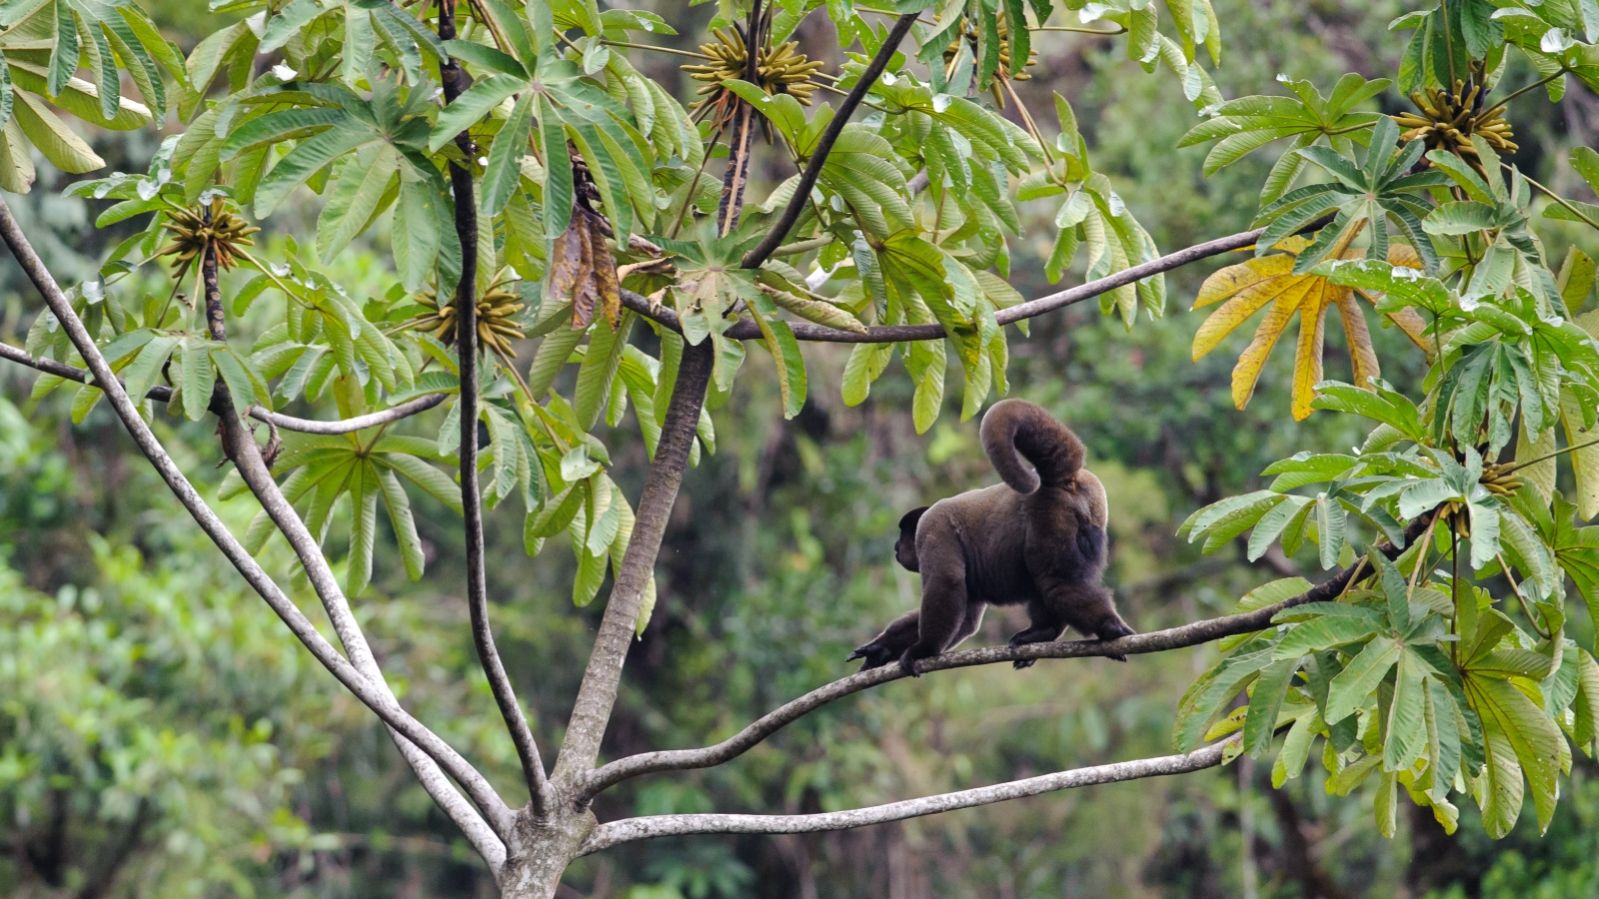 A rare brown woolly monkey in Peru’s rainforest. Photo by Salparadis/Shutterstock.com